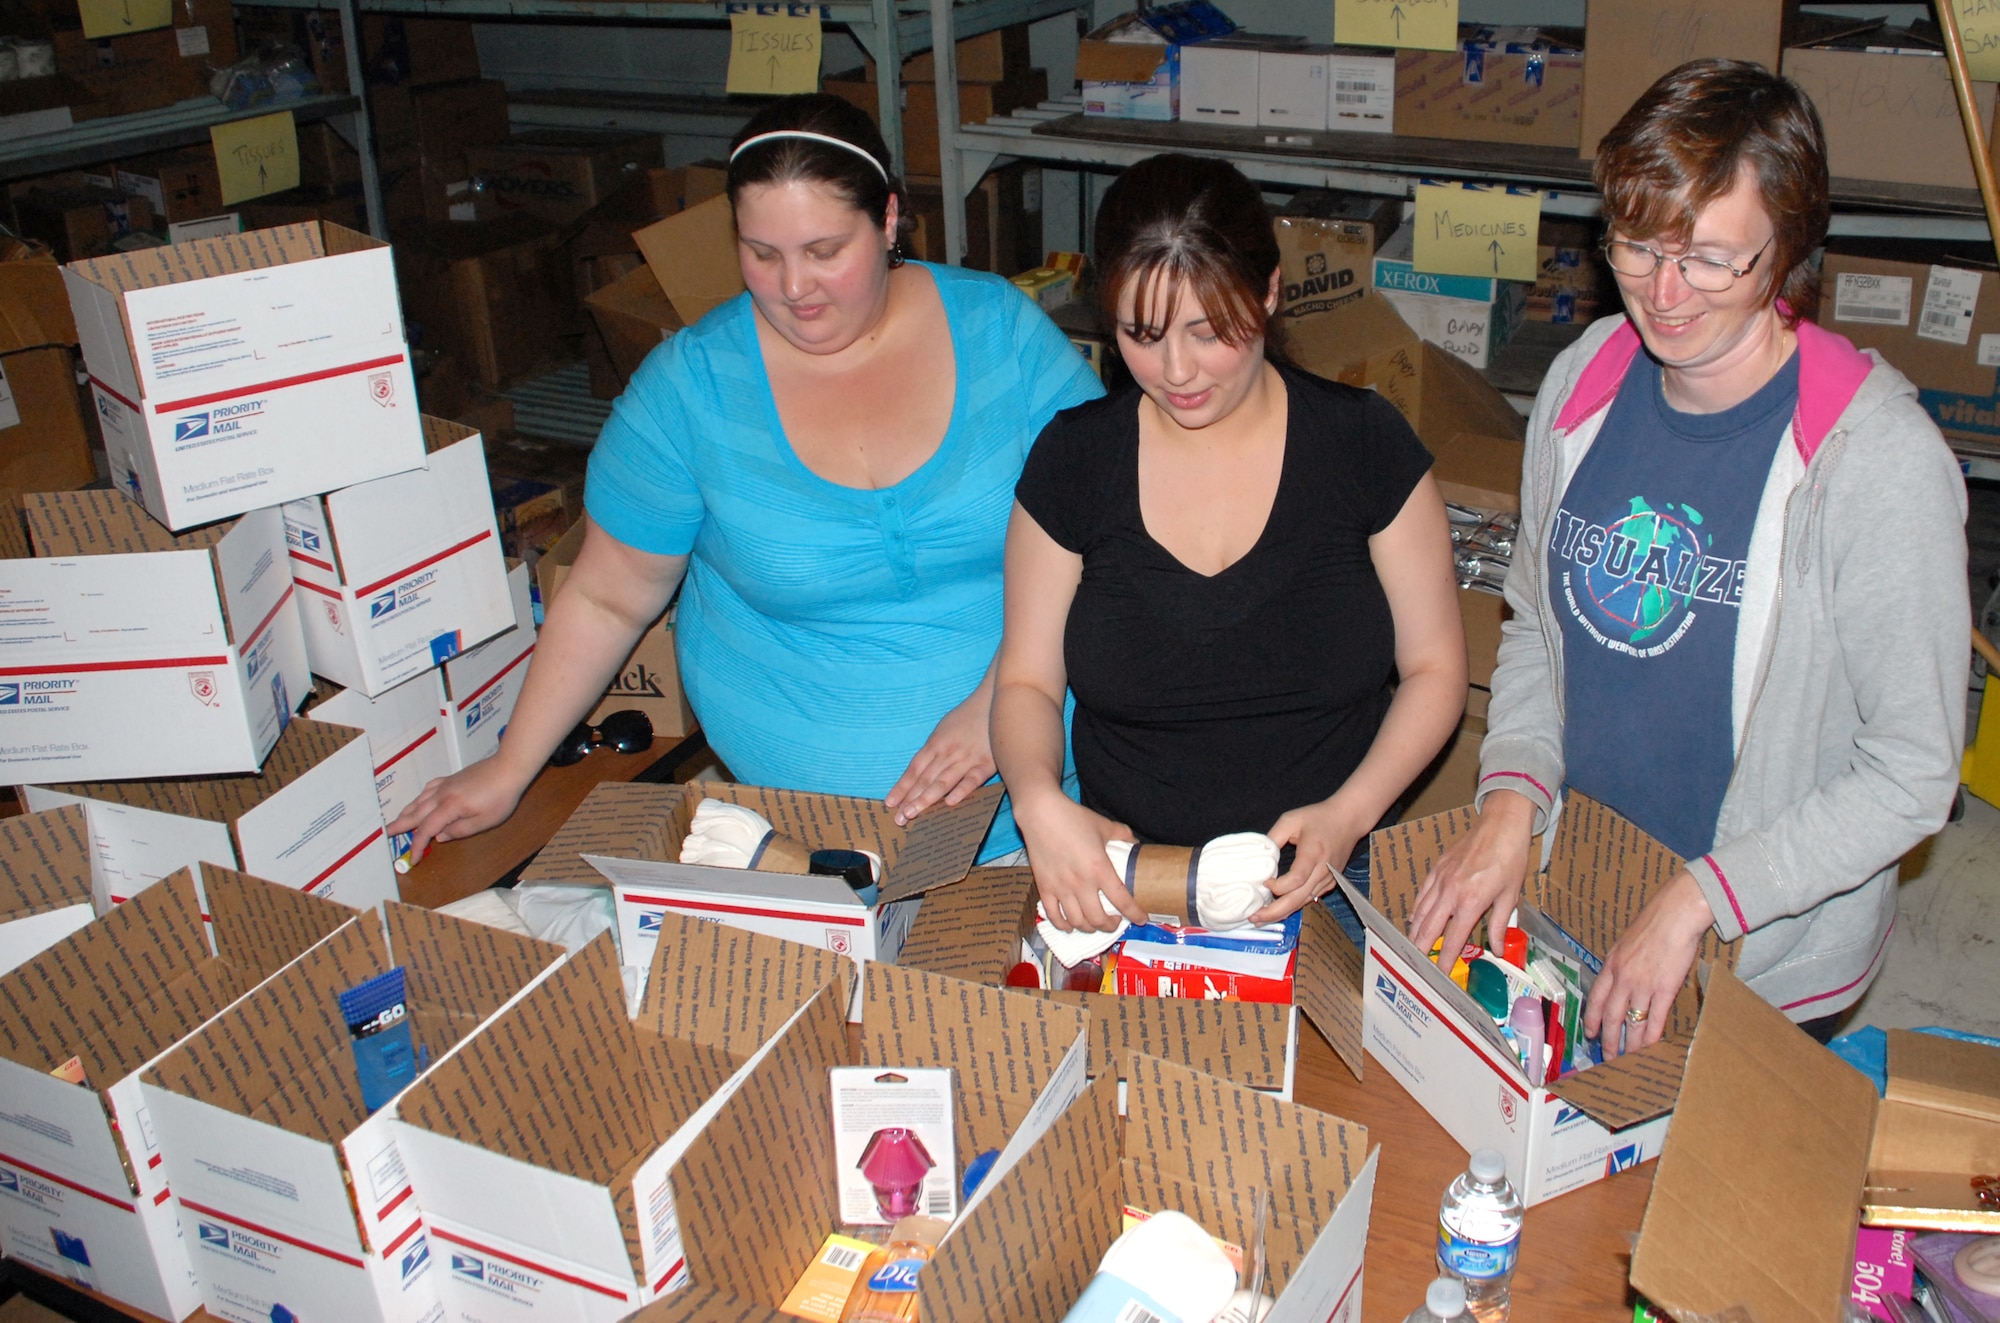 (Left to right) Military spouses Brandy Coble, Amber Reese and Julie Lynn, help to make care packages for deployed Dover Airmen in the United Service Organizations? warehouse at Dover Air Force Base. (U.S. Air Force photo/Airman 1st Class Shen-Chia Chu)